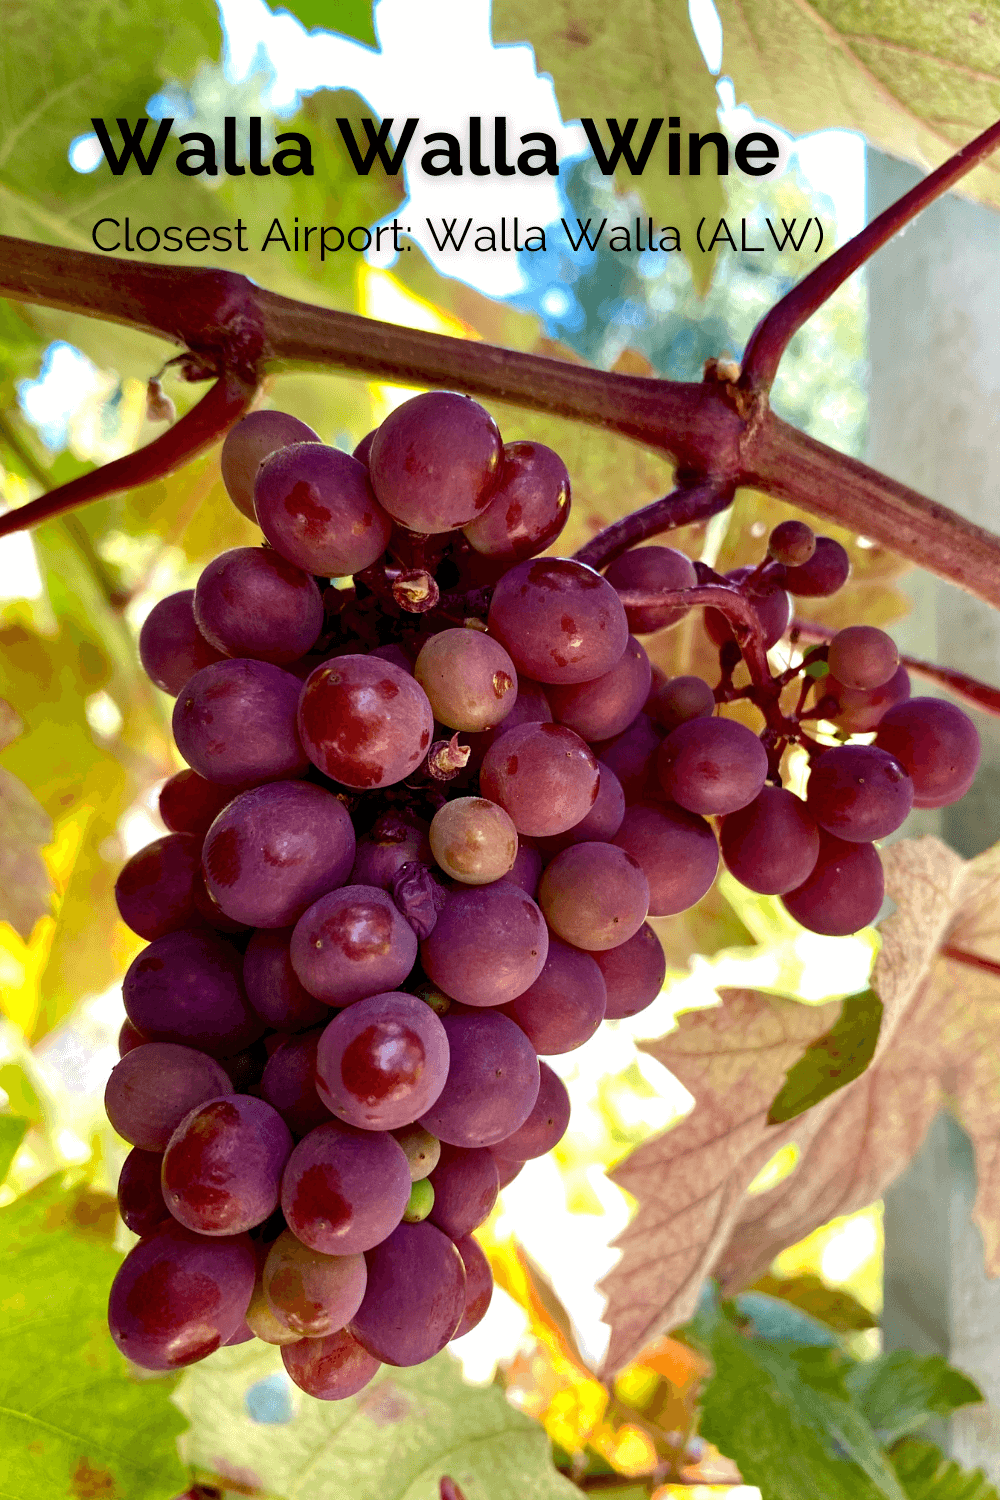 A ripe bunch of grapes clings to a vine amongst some fading summer leaves getting ready to turn colors for the fall.  